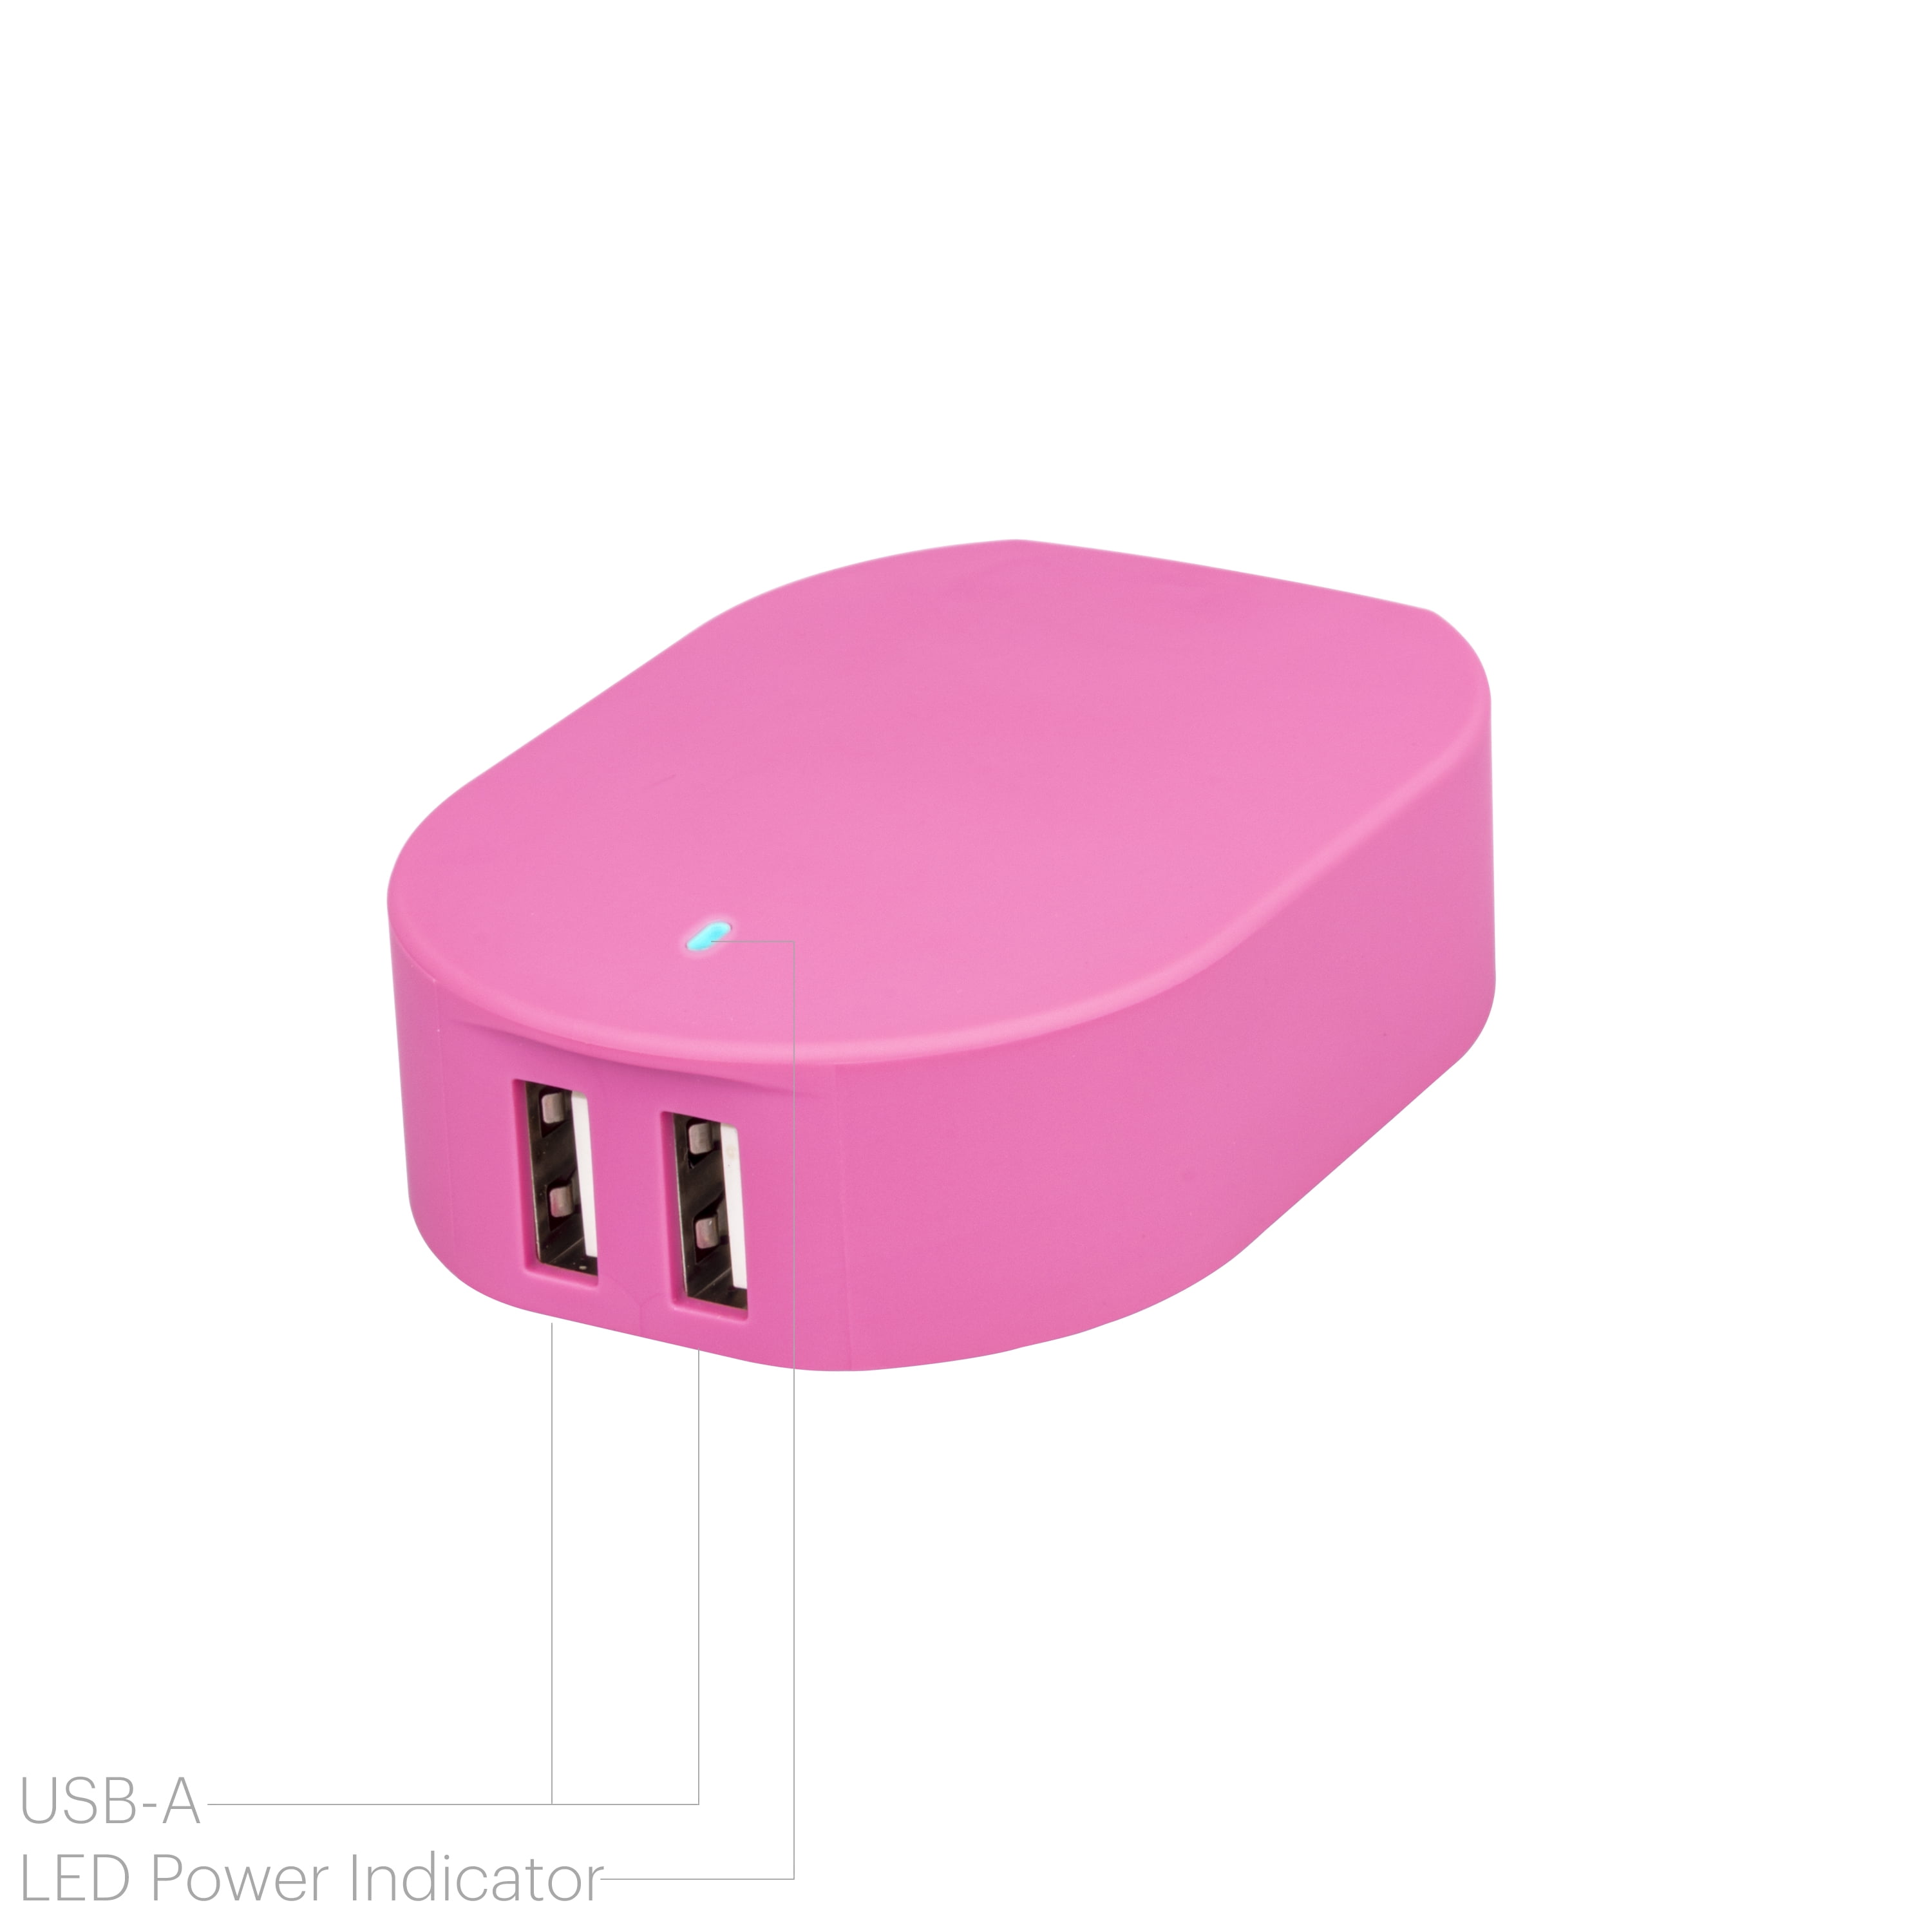 onn. 4.8A Dual-Port USB Wall Charger, Foldable Plug, Compatible for iPhone, iPad and Android Smartphones